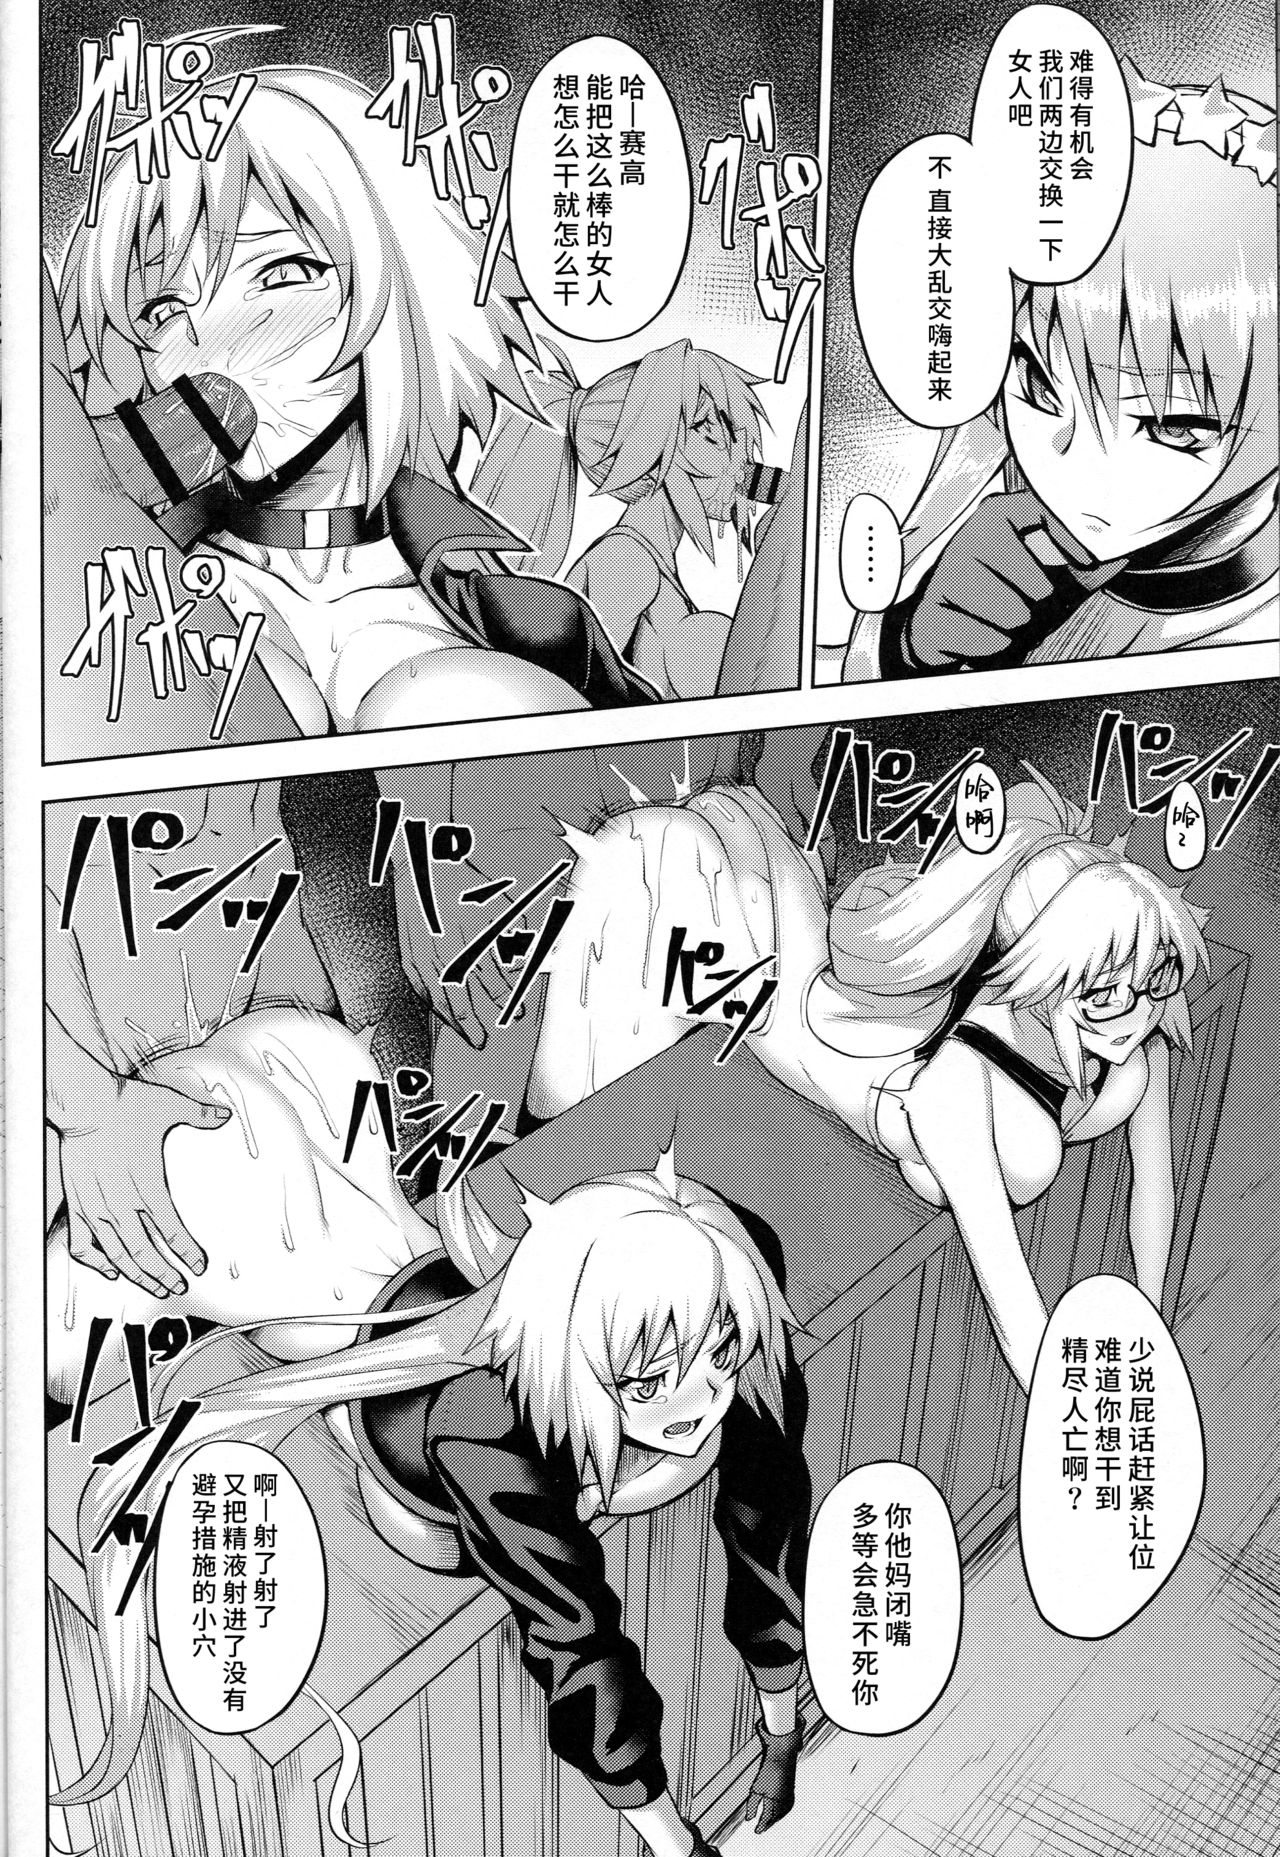 (C95) [Avion Village (Johnny)] ENDLESS VACANCES (Fate/Grand Order) [Chinese] [水土不服汉化组] page 16 full